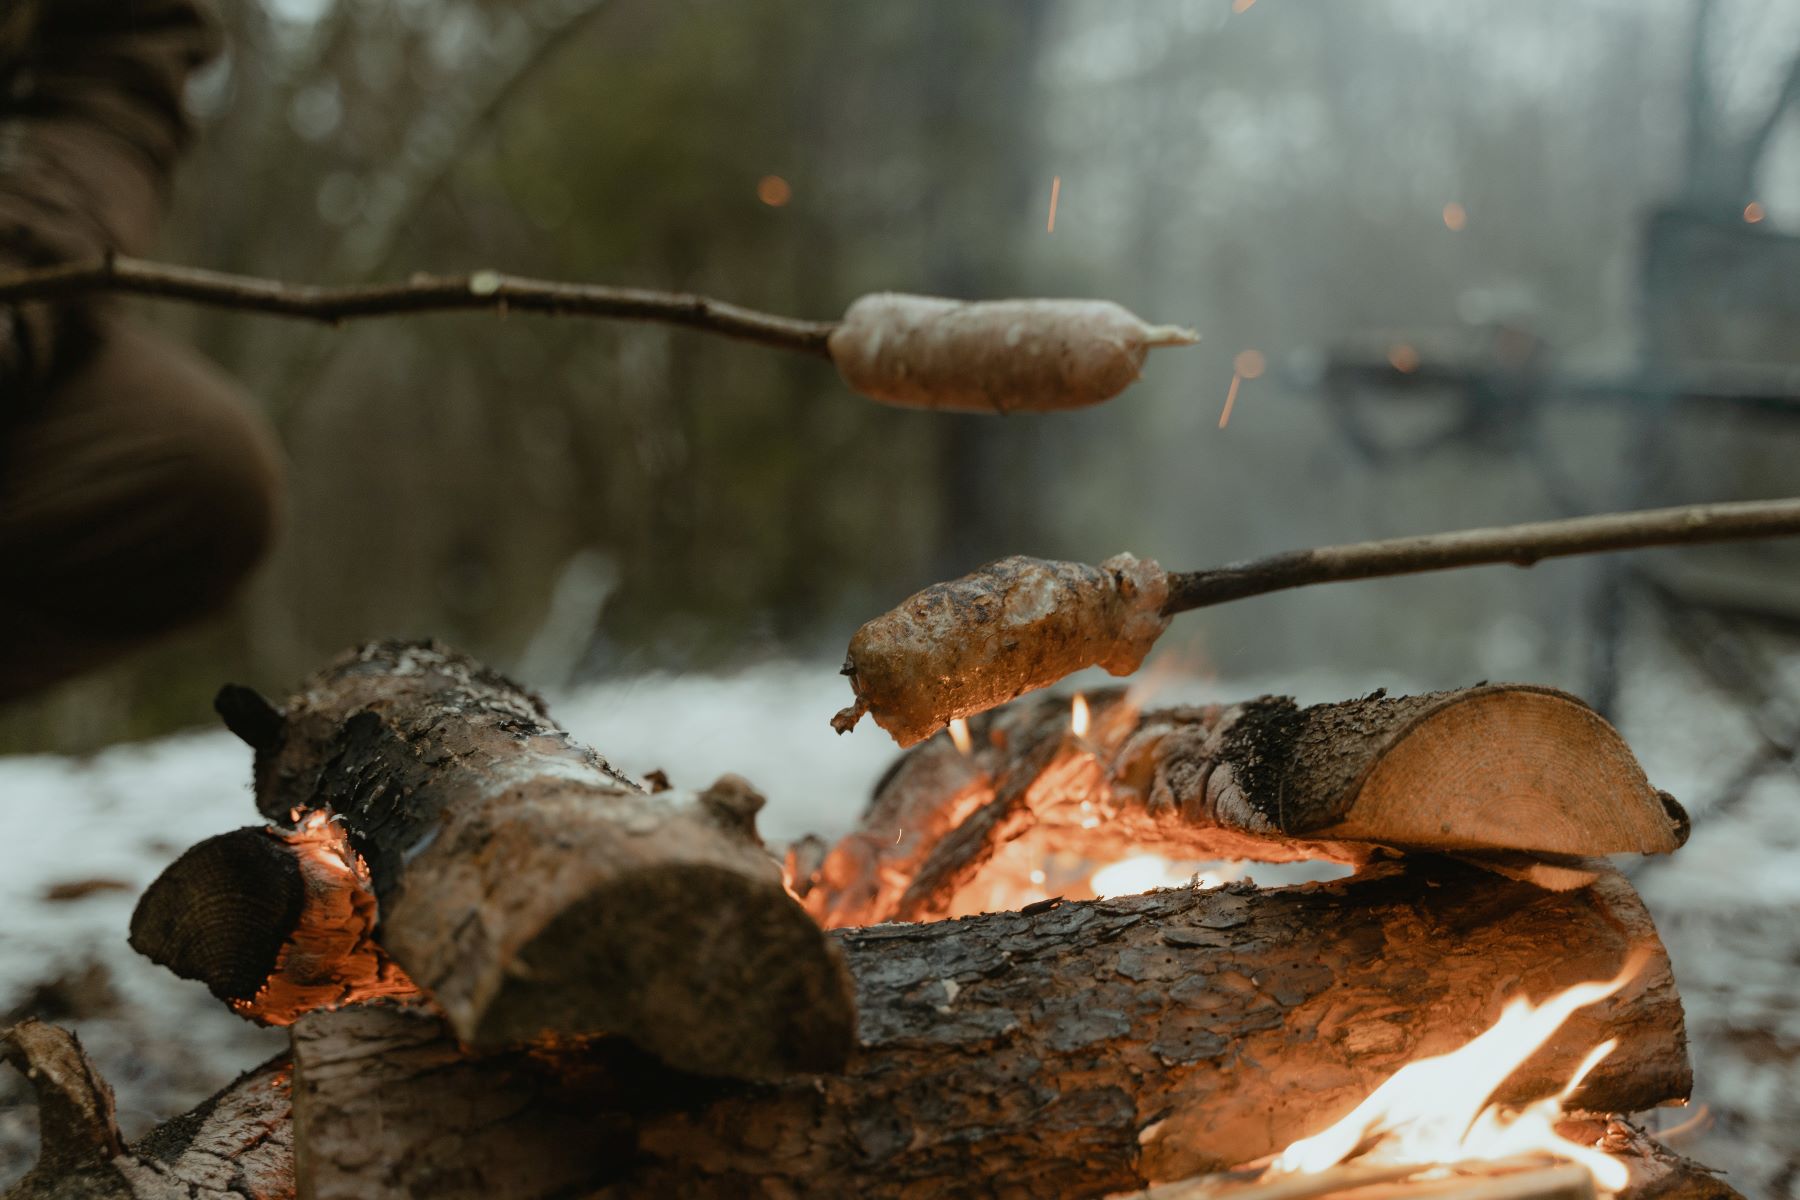 Campfire Photography: Creating A Tripod For Capturing Outdoor Cooking